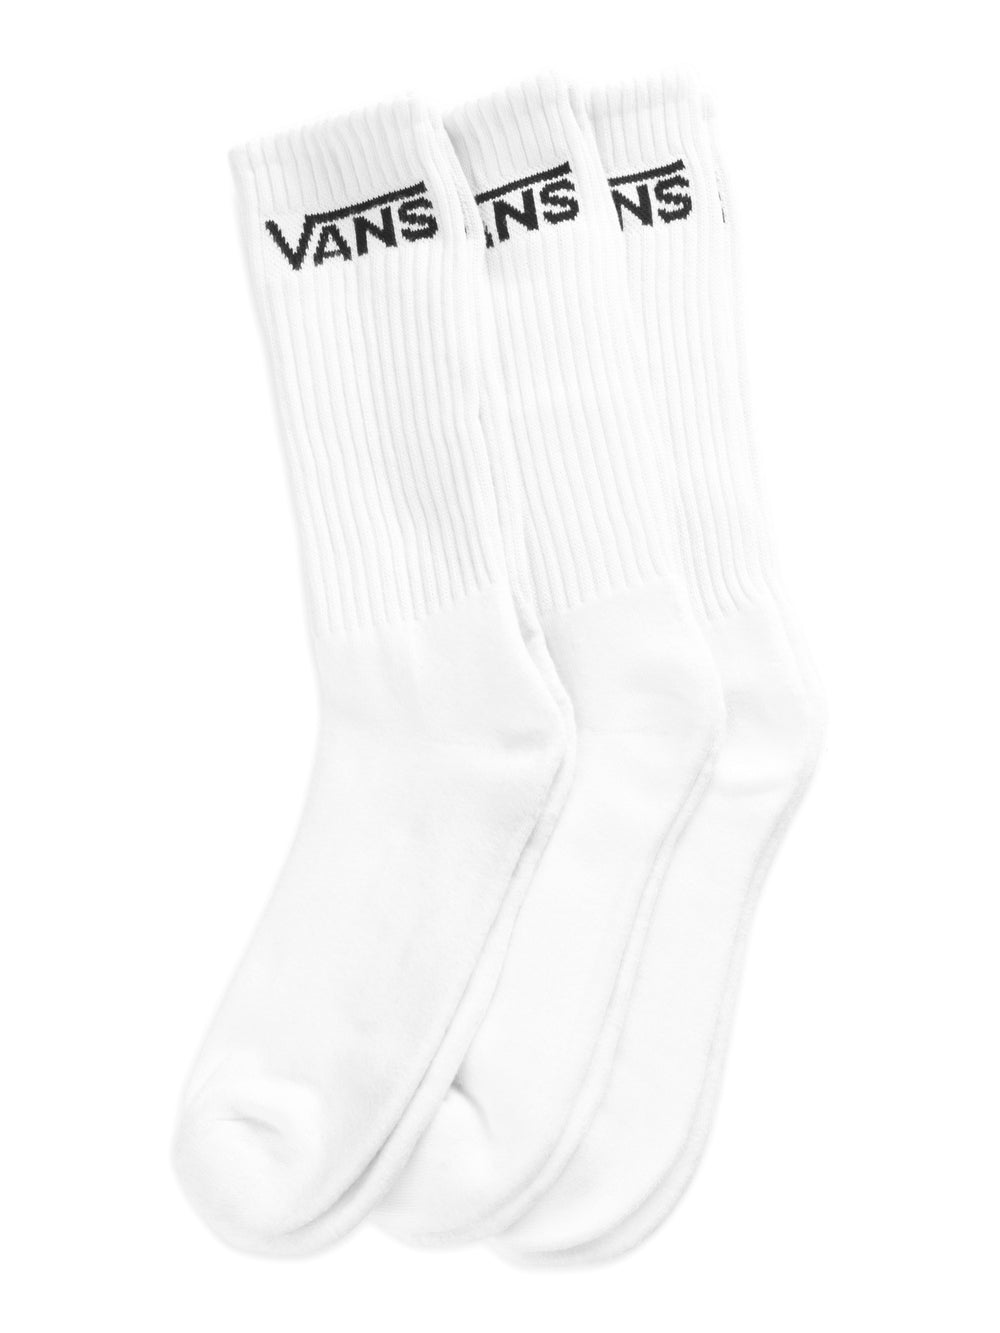 VANS | PACK Footwear SOCKS Collective 3 Boathouse CREW CLASSIC